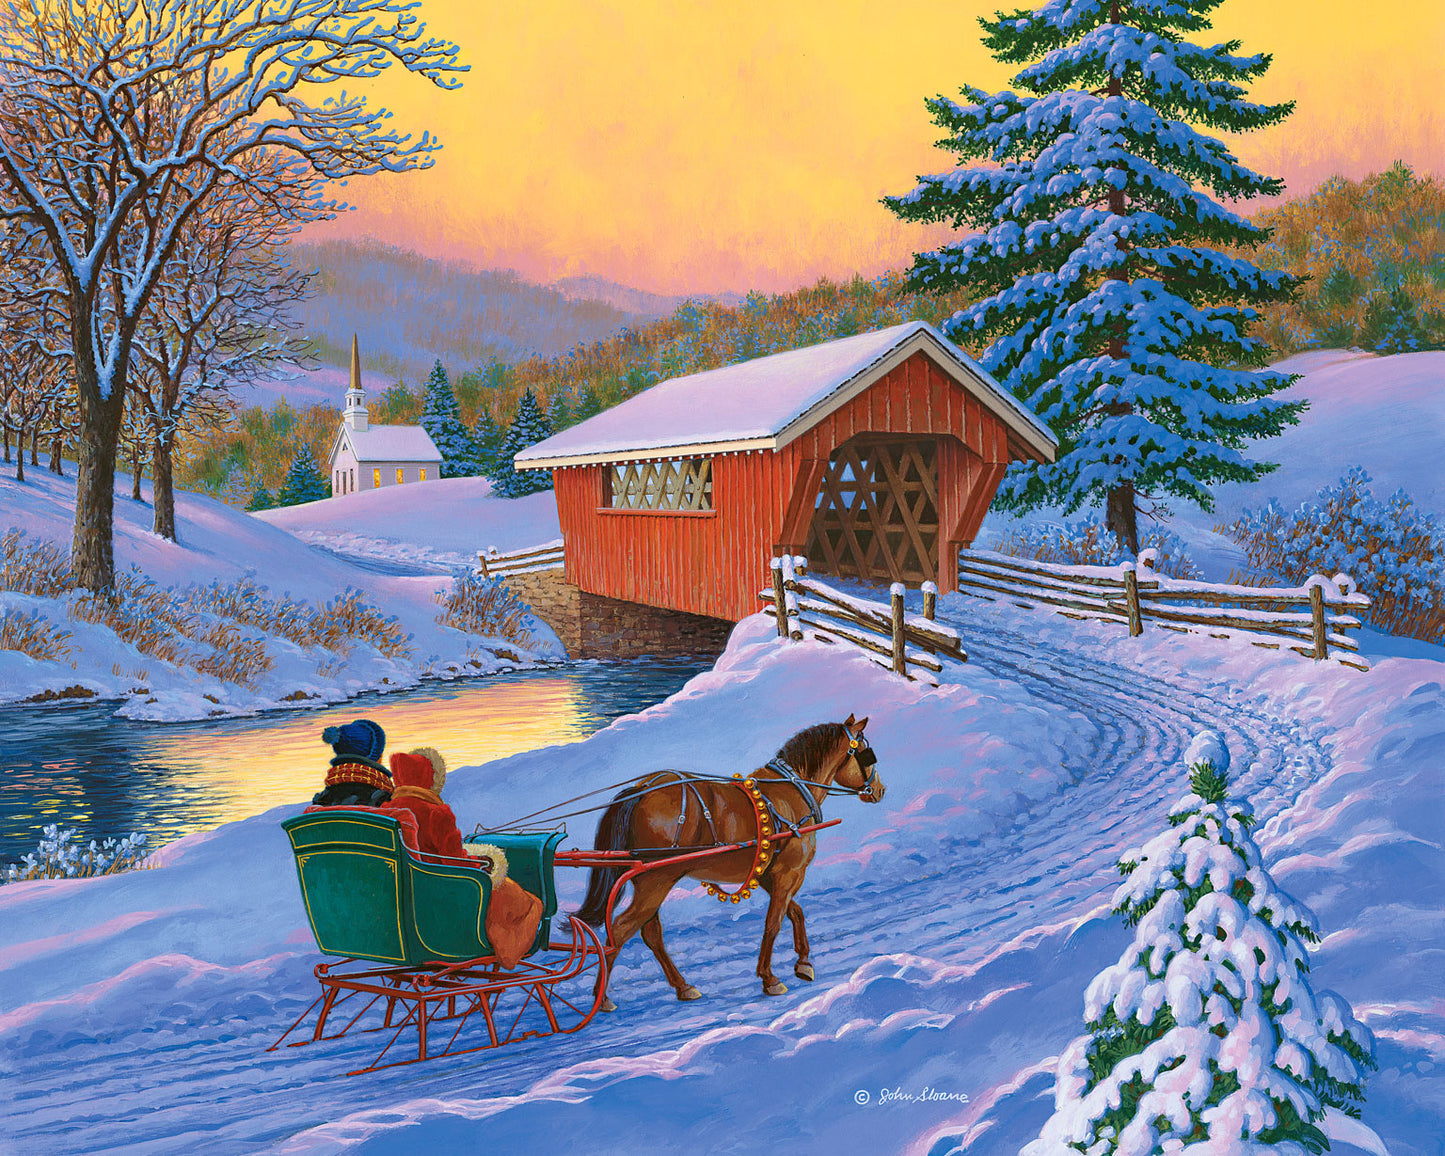 Golden Moments - Puzzle by John Sloane